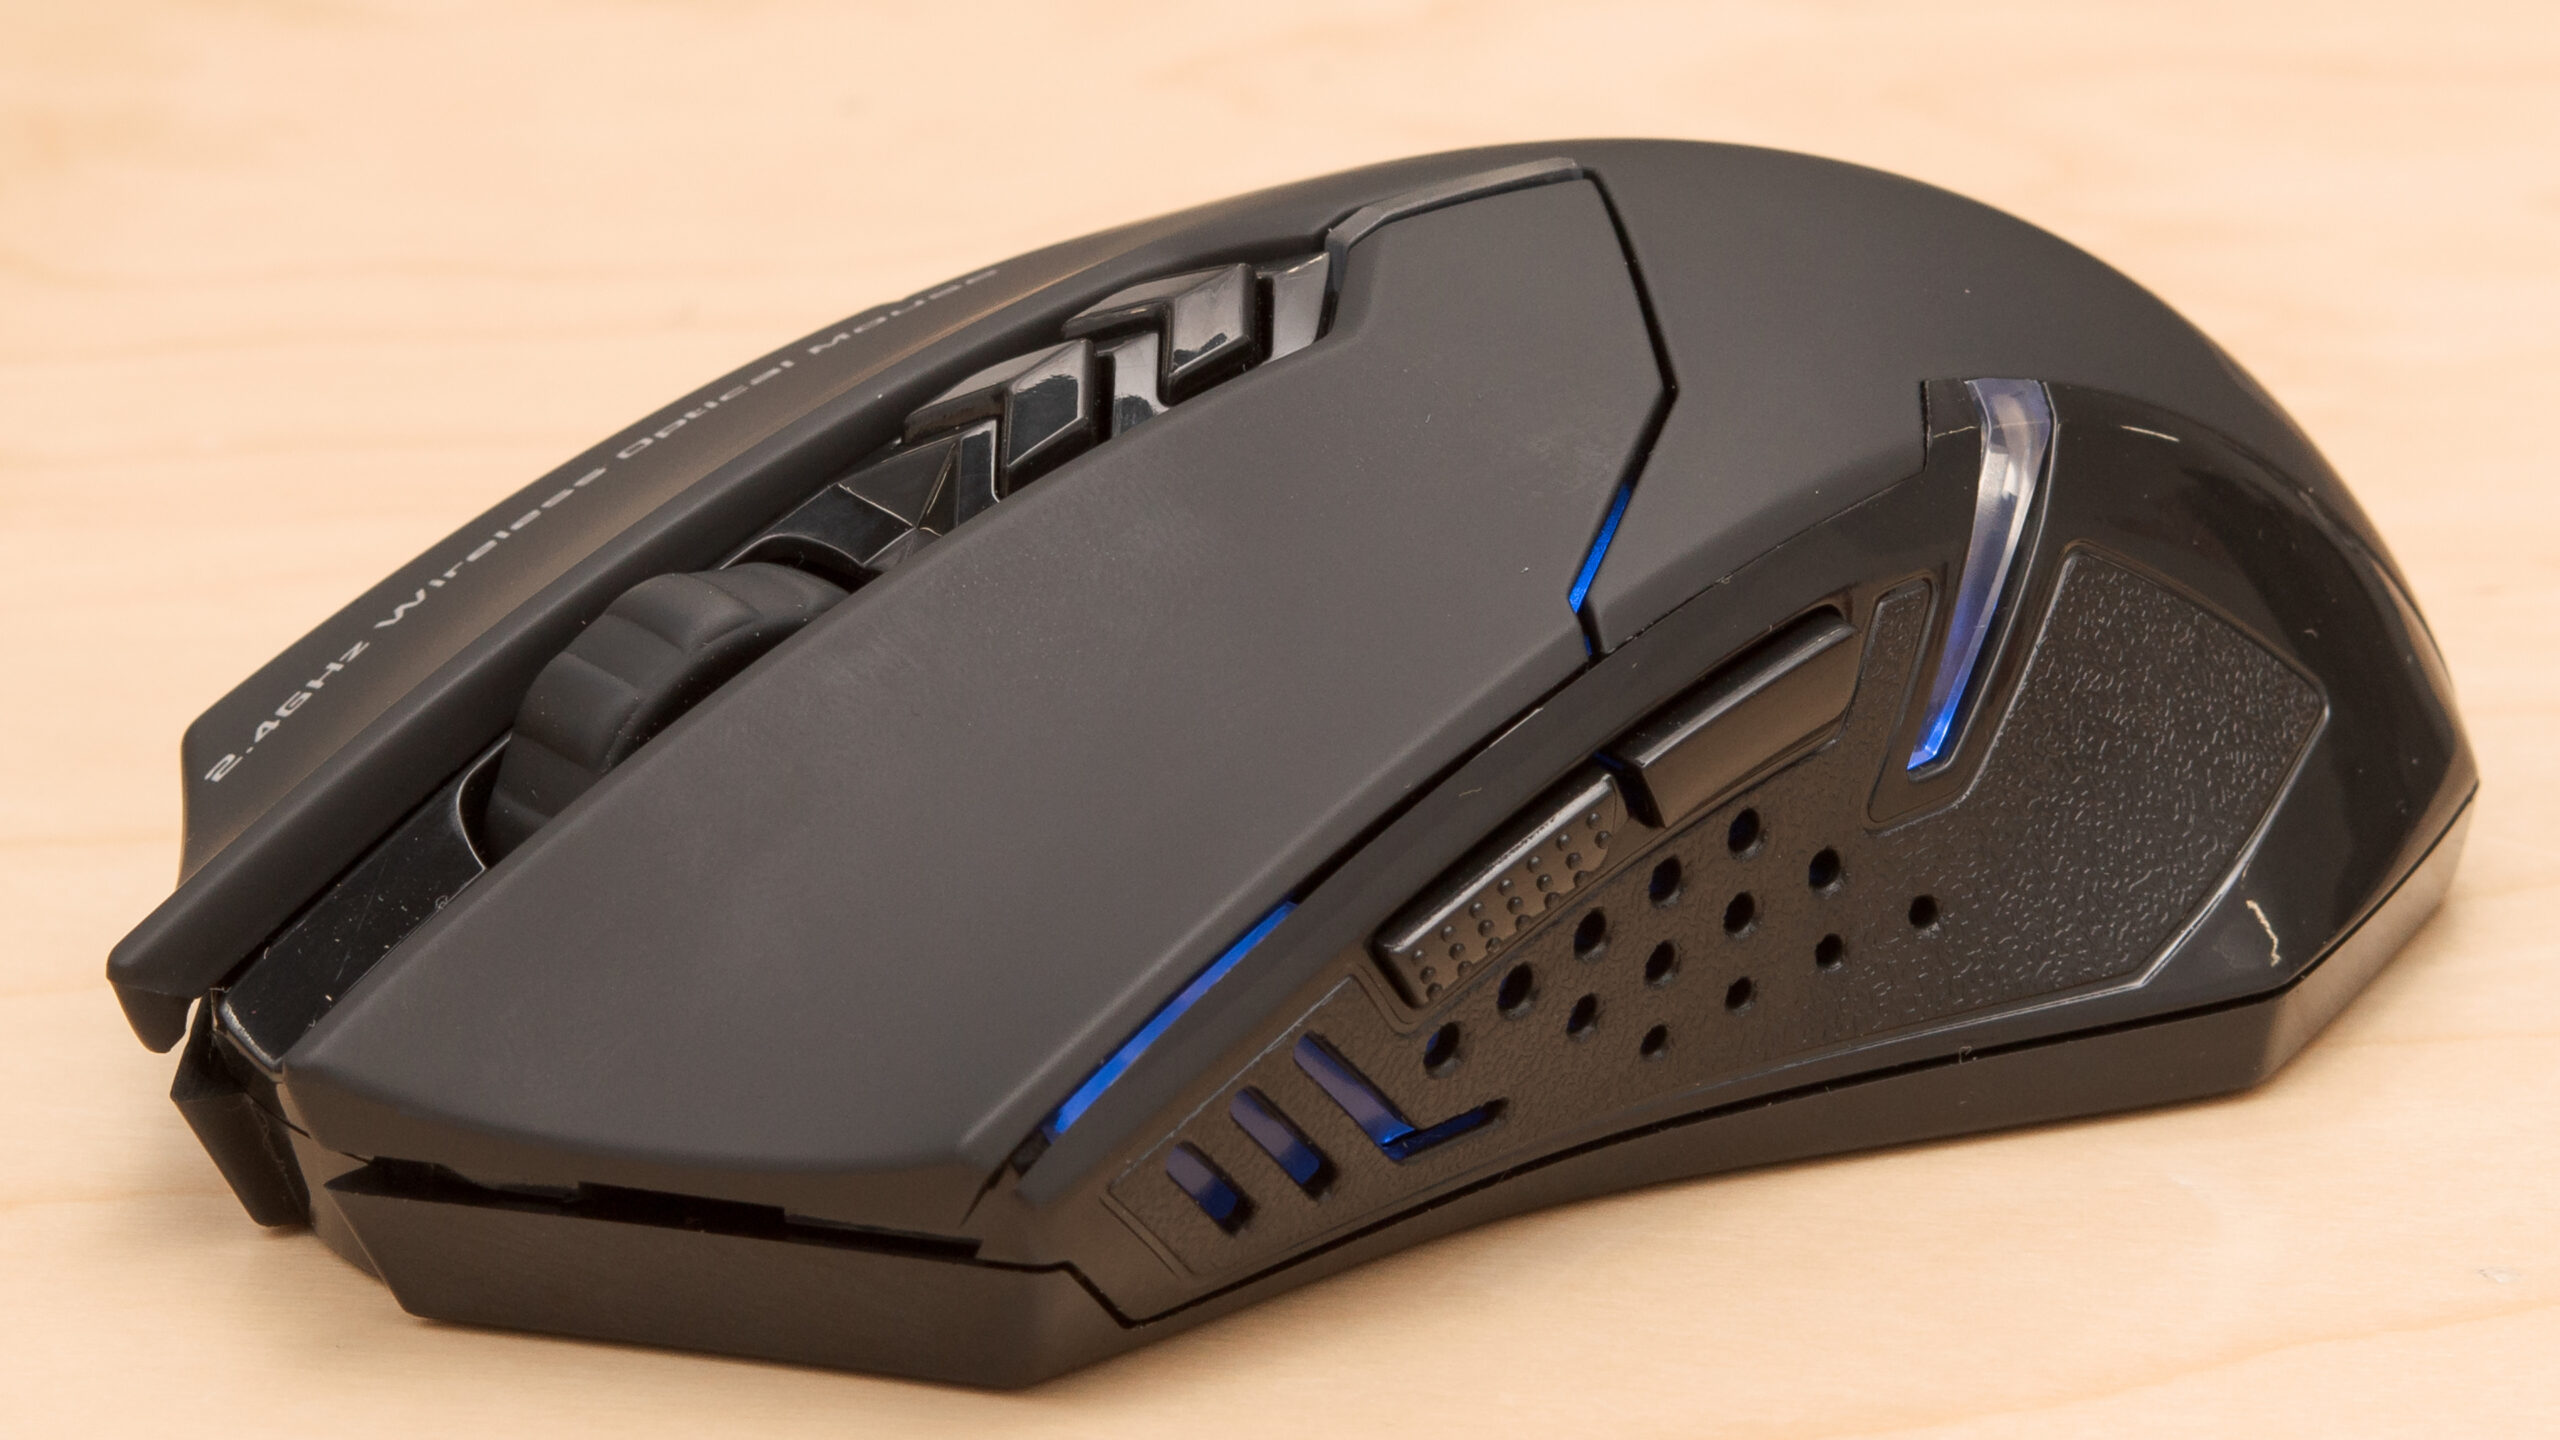 VicTsing 2.4G Wireless Mouse Review